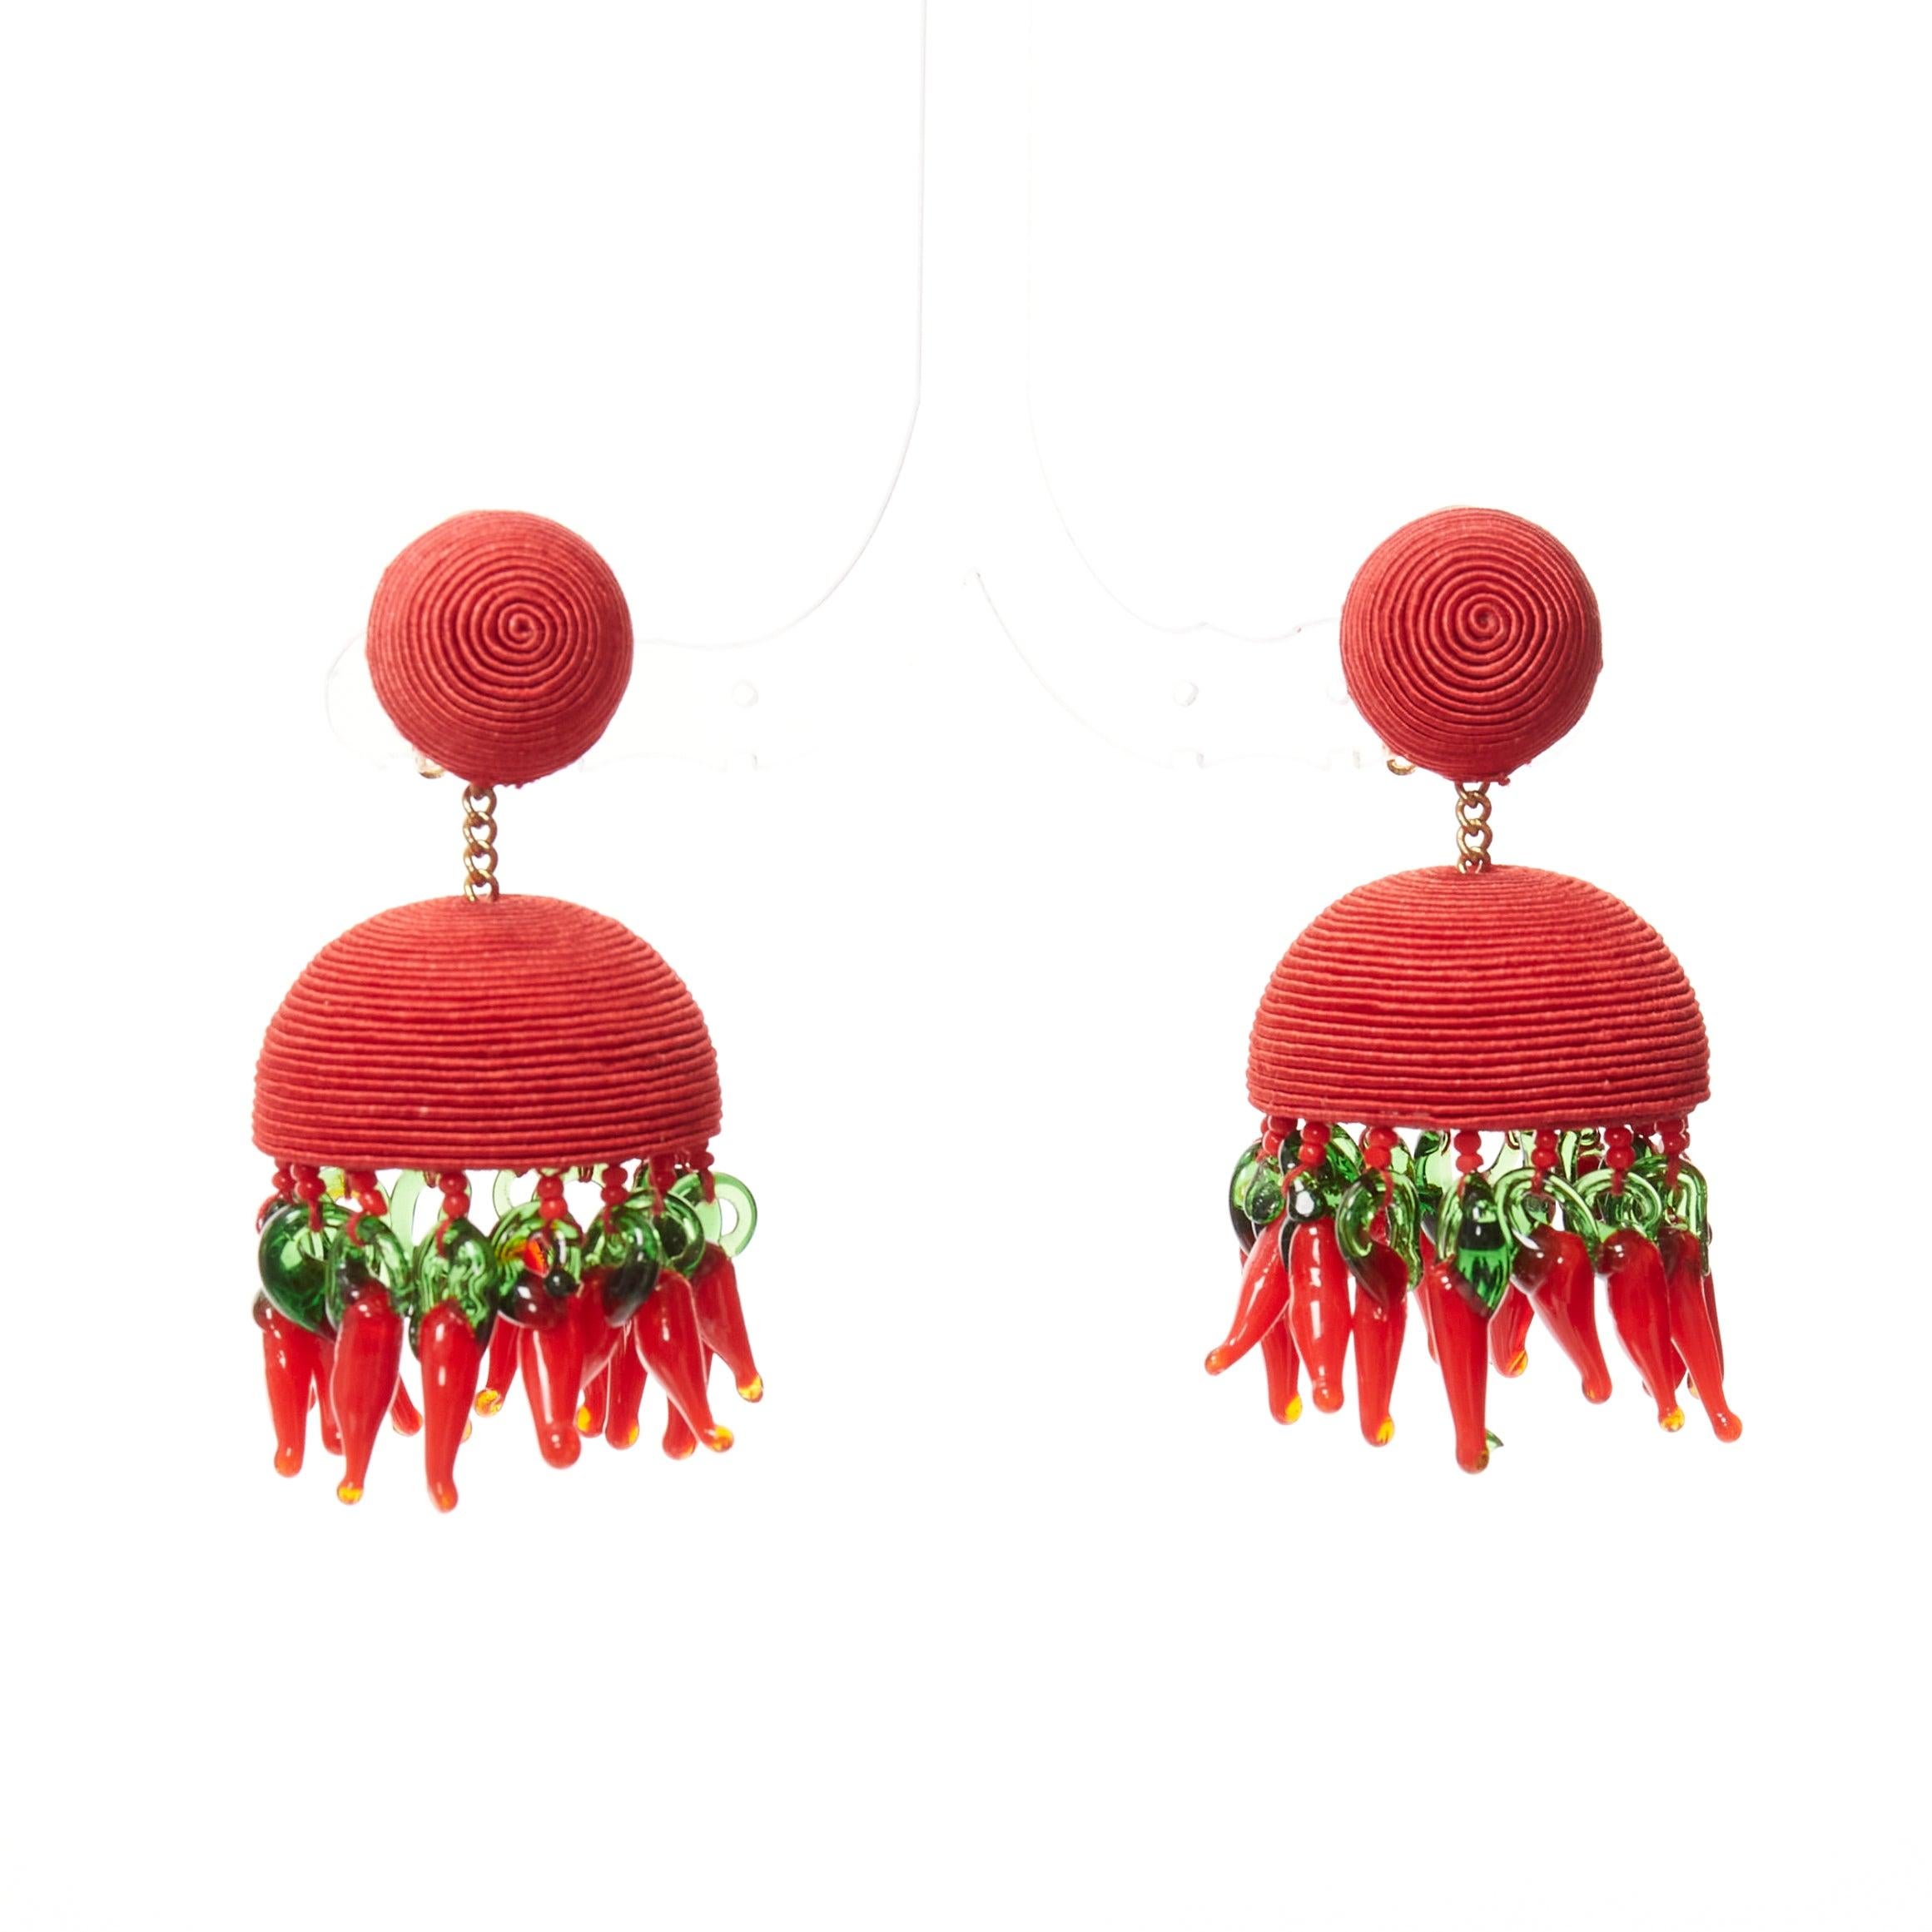 REBECCA DE RAVENEL red resin chilli beaded jellyfish tassel clip on earrings
Reference: AAWC/A01239
Brand: Rebecca De Ravenel
Material: Fabric, Resin
Color: Red, Green
Pattern: Solid
Closure: Clip On
Lining: Gold Metal

CONDITION:
Condition: